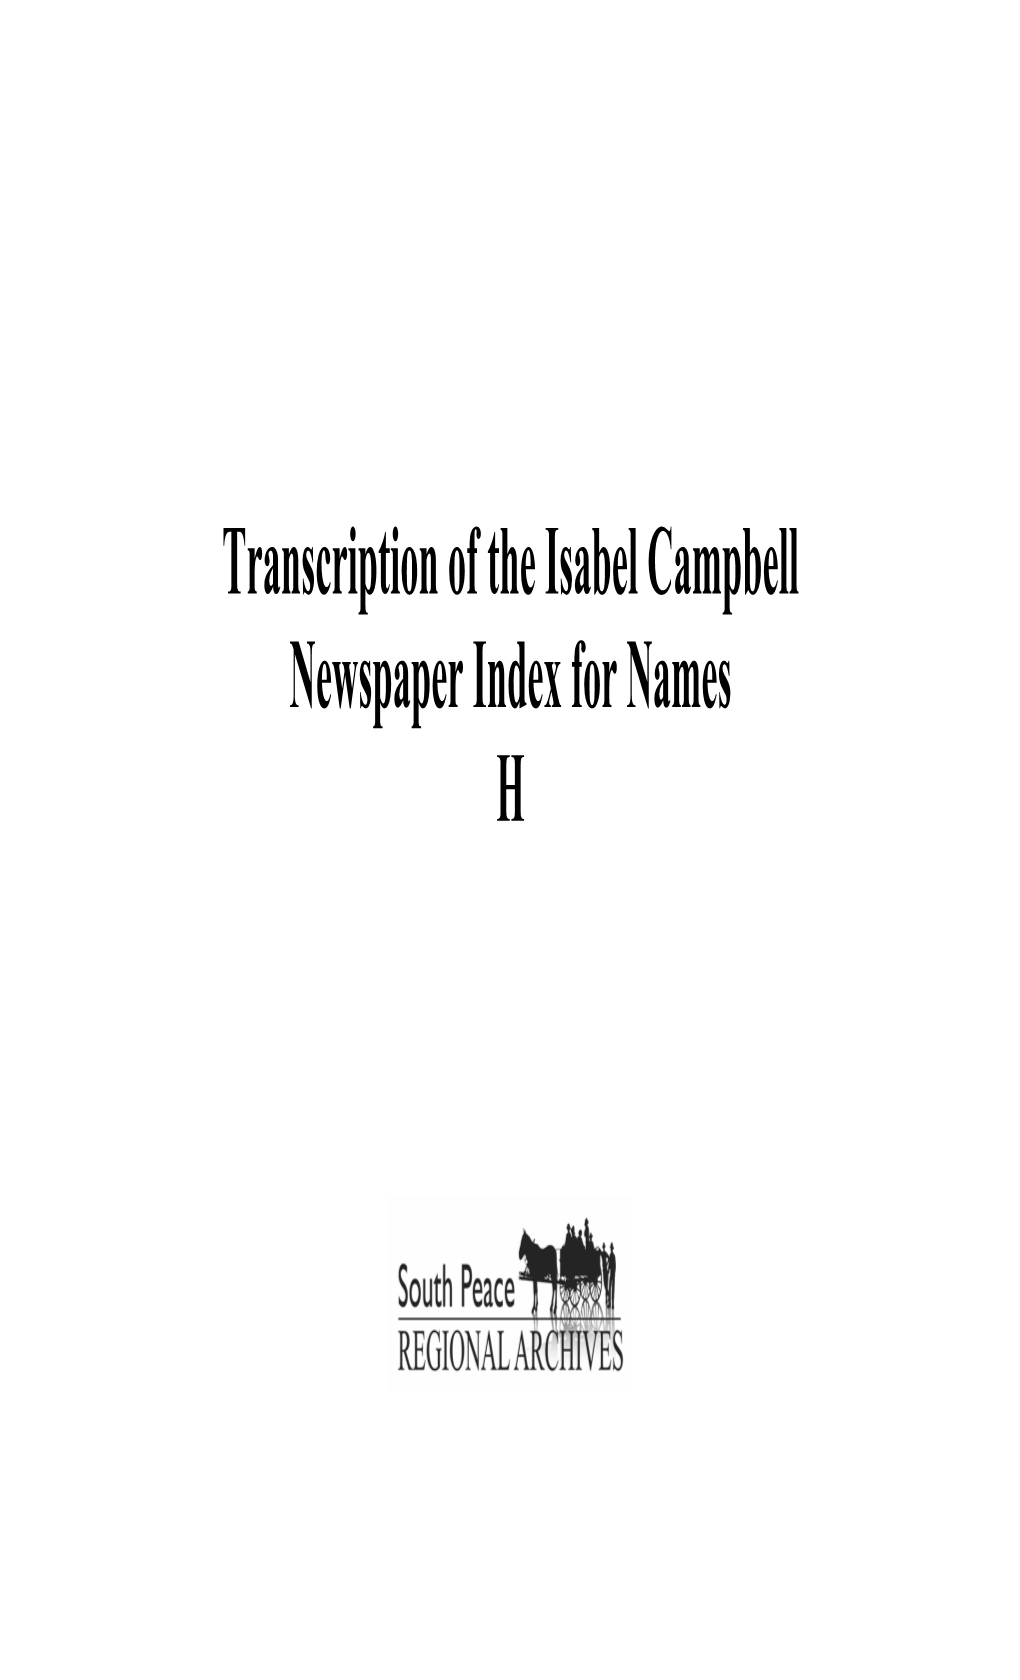 Transcription of the Isabel Campbell Newspaper Index for Names H